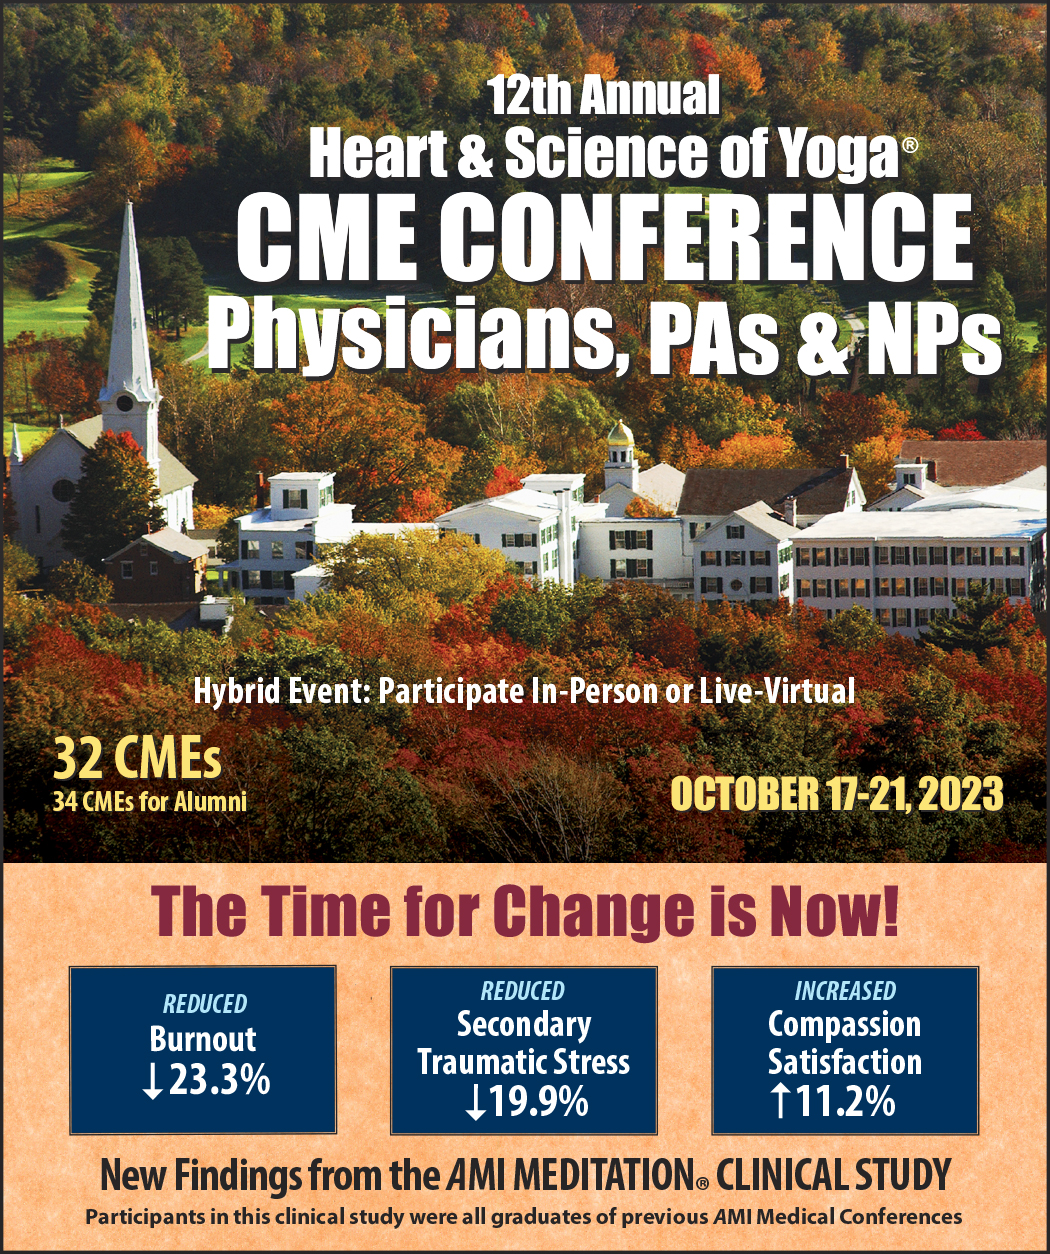 Heart & Science of Yoga CME Conference